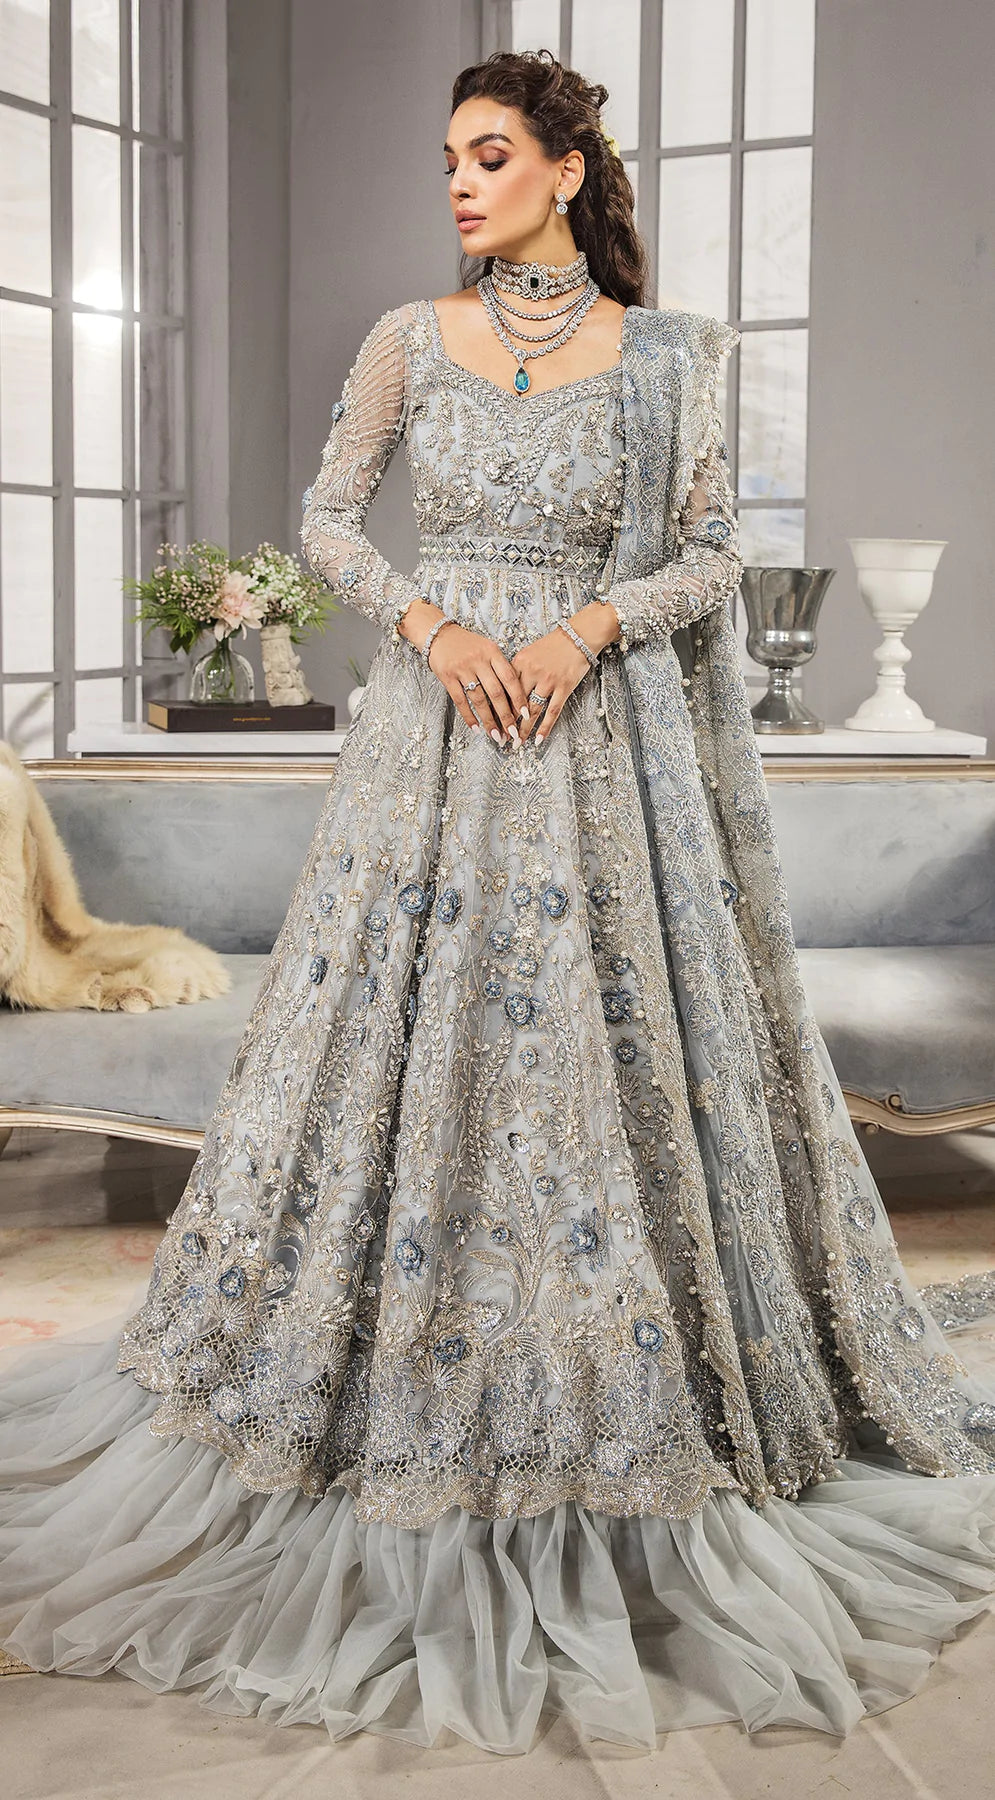 Beautiful Lehenga-Choli with traditional silhouettes and classy color  combinations. | Indian outfits lehenga, Indian lehenga choli, Indian  fashion dresses